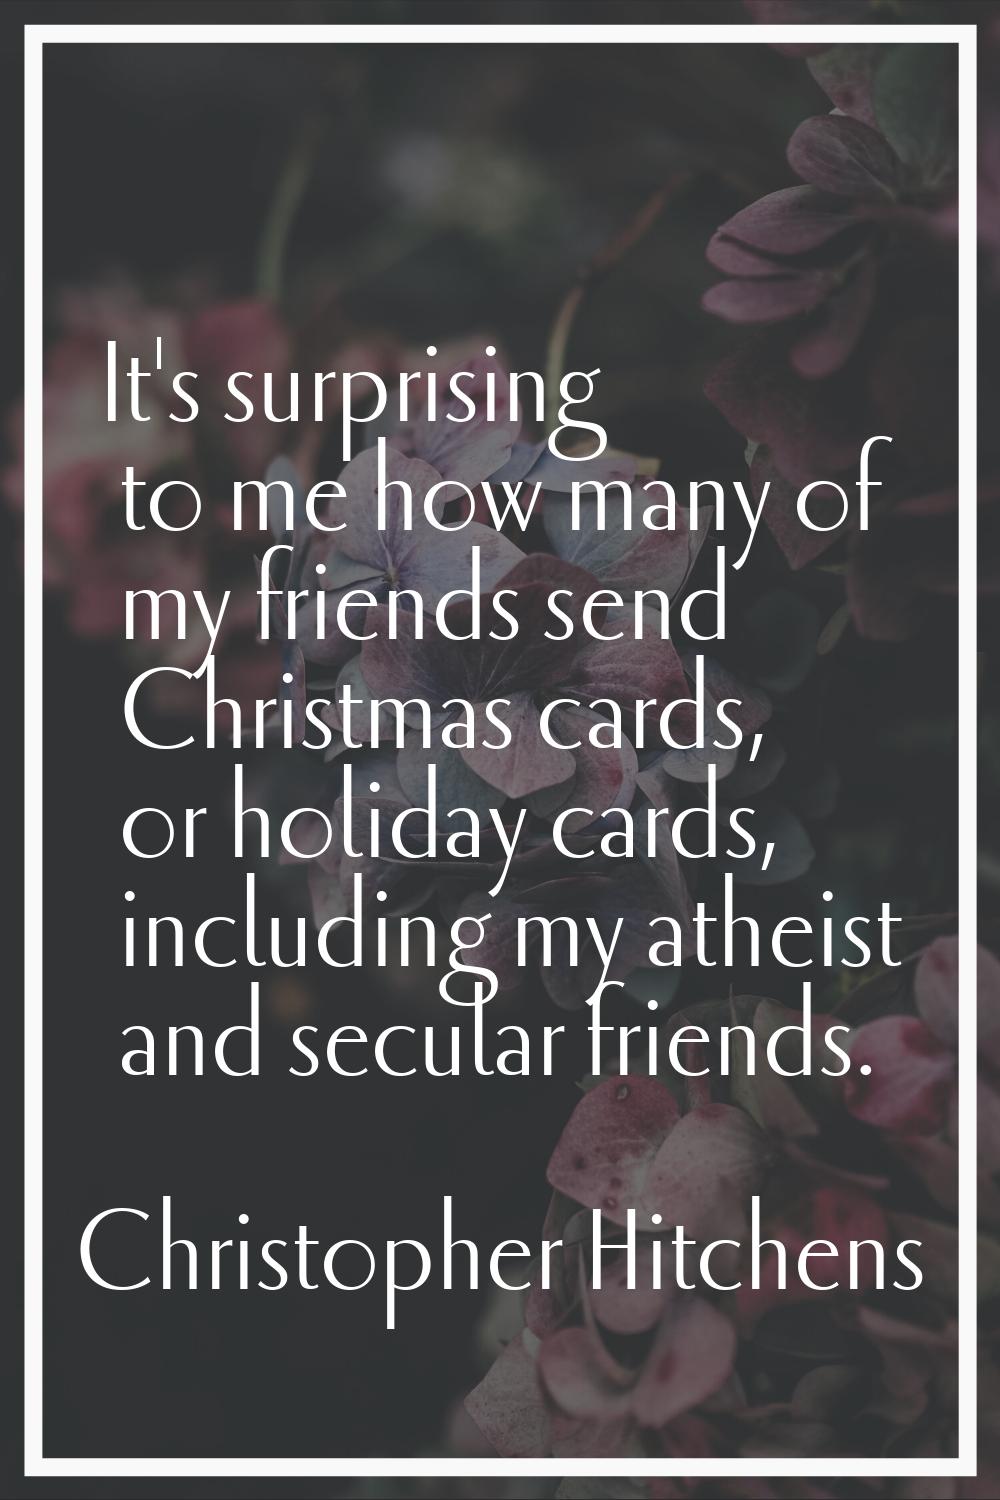 It's surprising to me how many of my friends send Christmas cards, or holiday cards, including my a